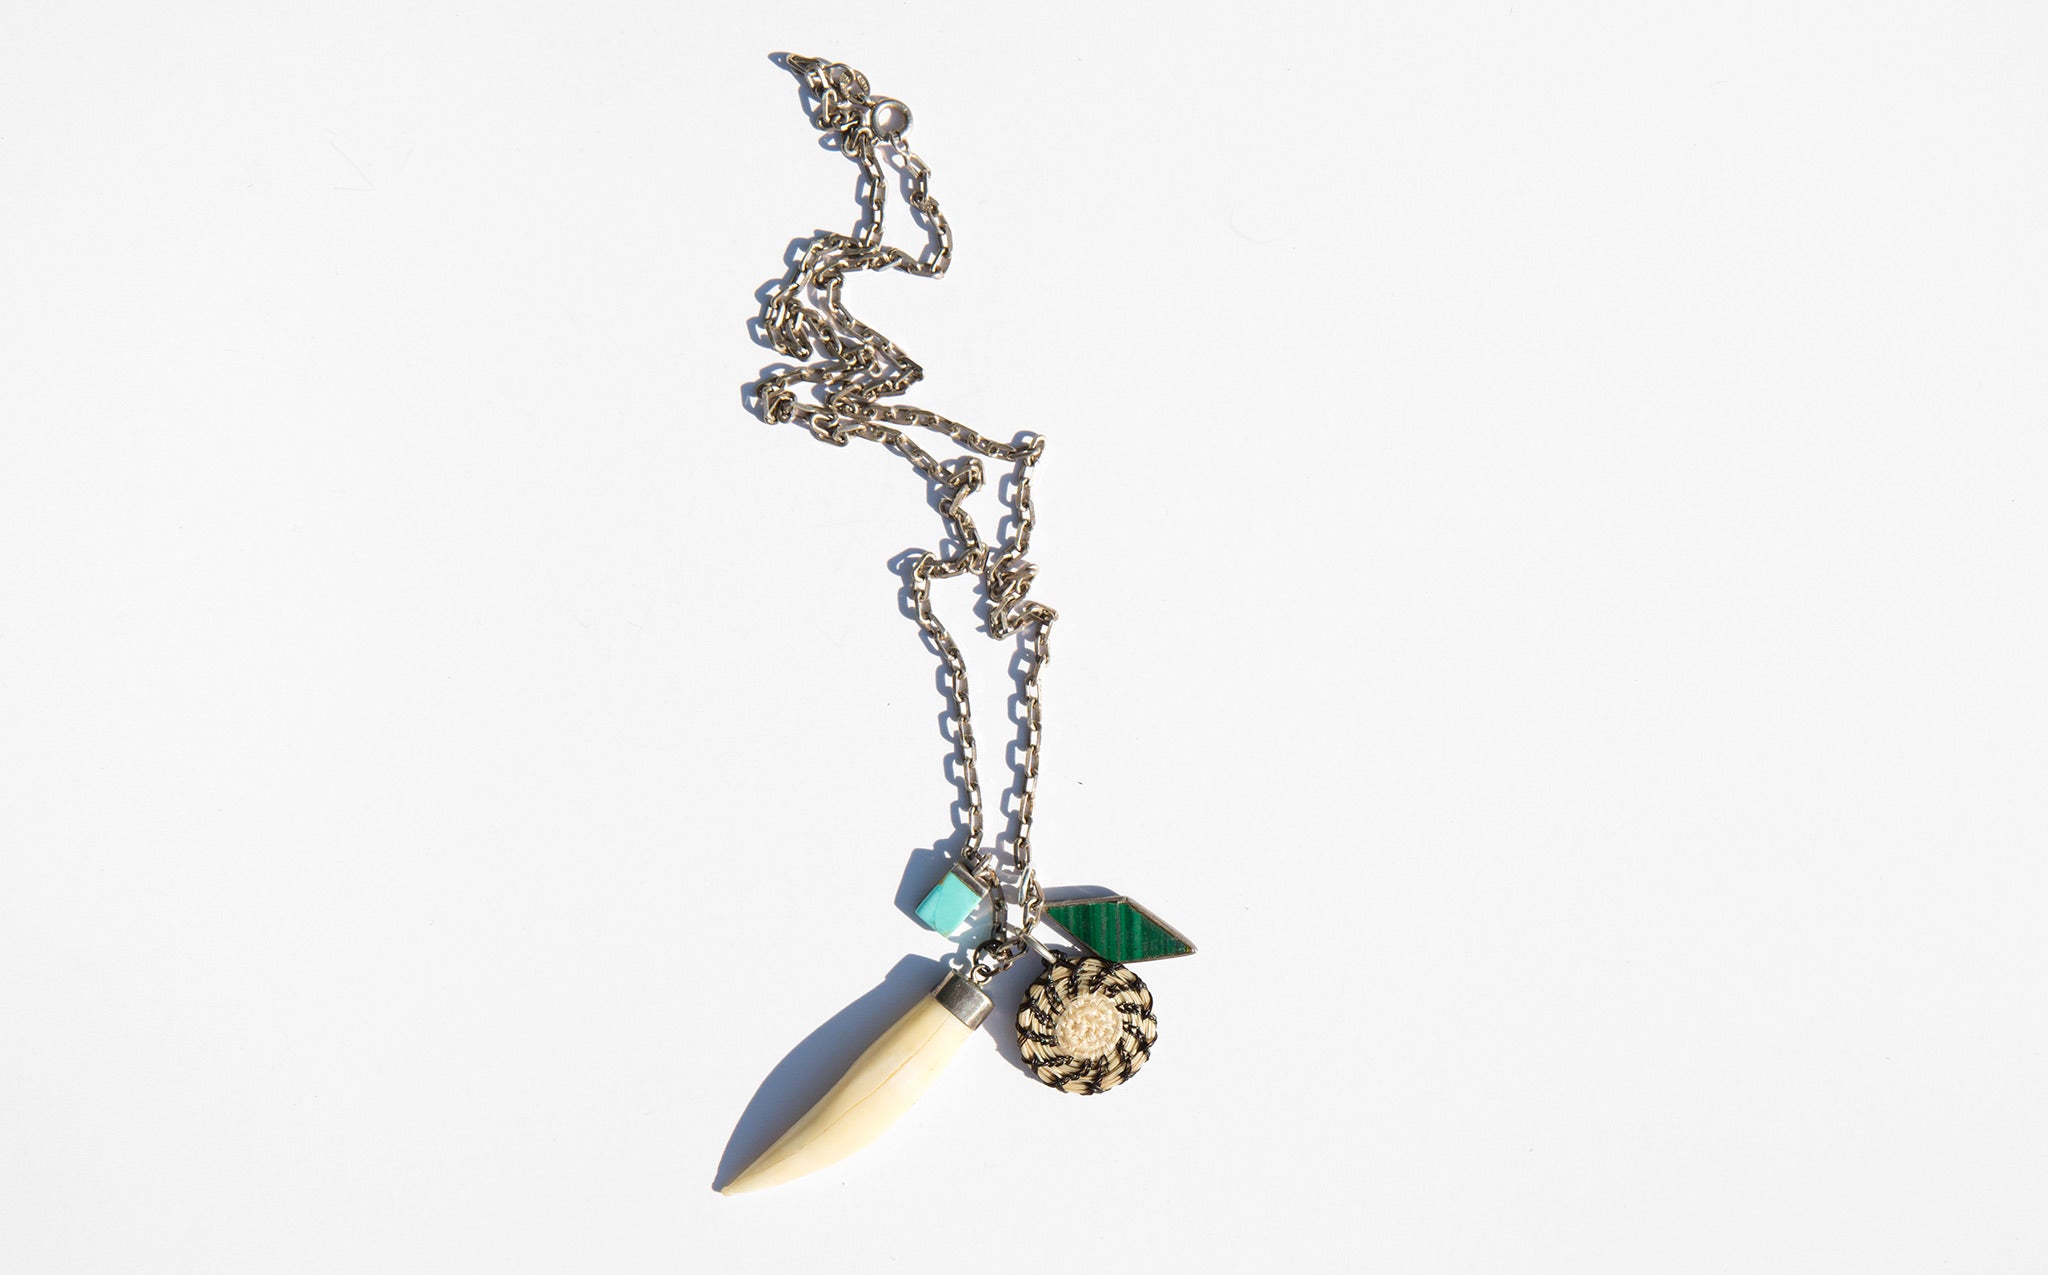 The Wandering Spirit Charm necklace